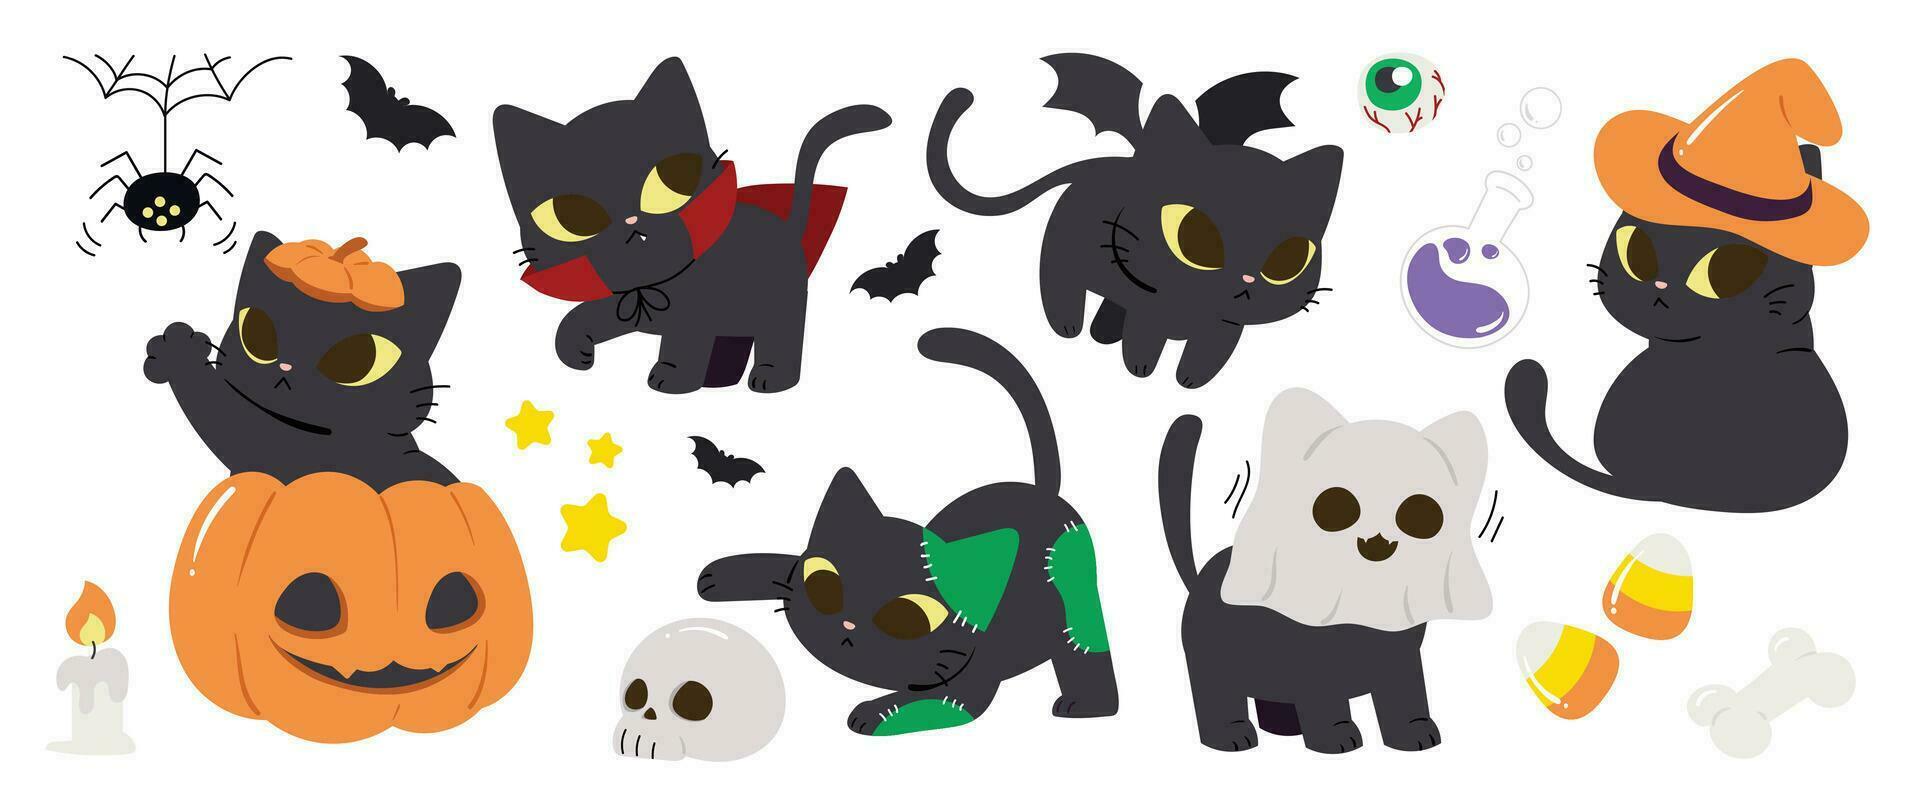 Happy Halloween day lovey pet vector. Cute collection of cats with halloween costumes, ghost, bat, pumpkin, spider. Adorable animal characters in autumn festival for decoration, prints, cover. vector